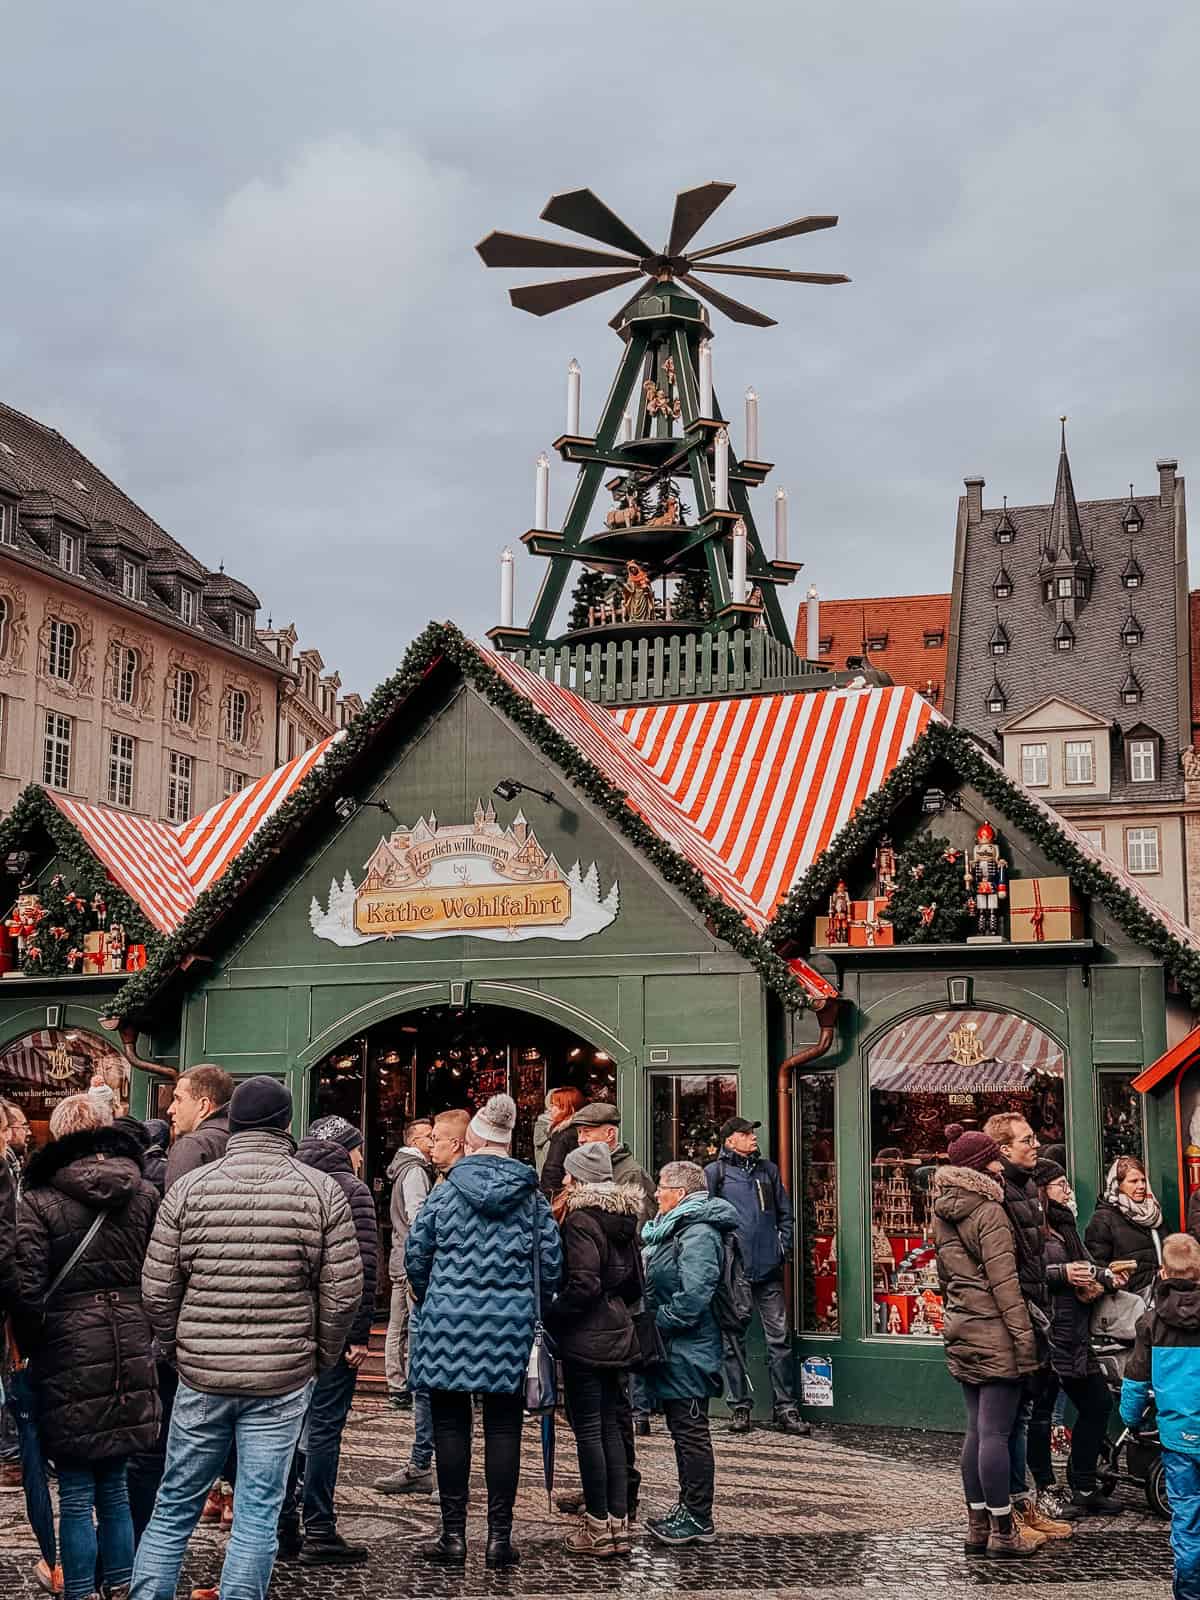 A Kathe Wolfhart stall in a Chrismas market in Europe decorated in candy cane stripes with green siding